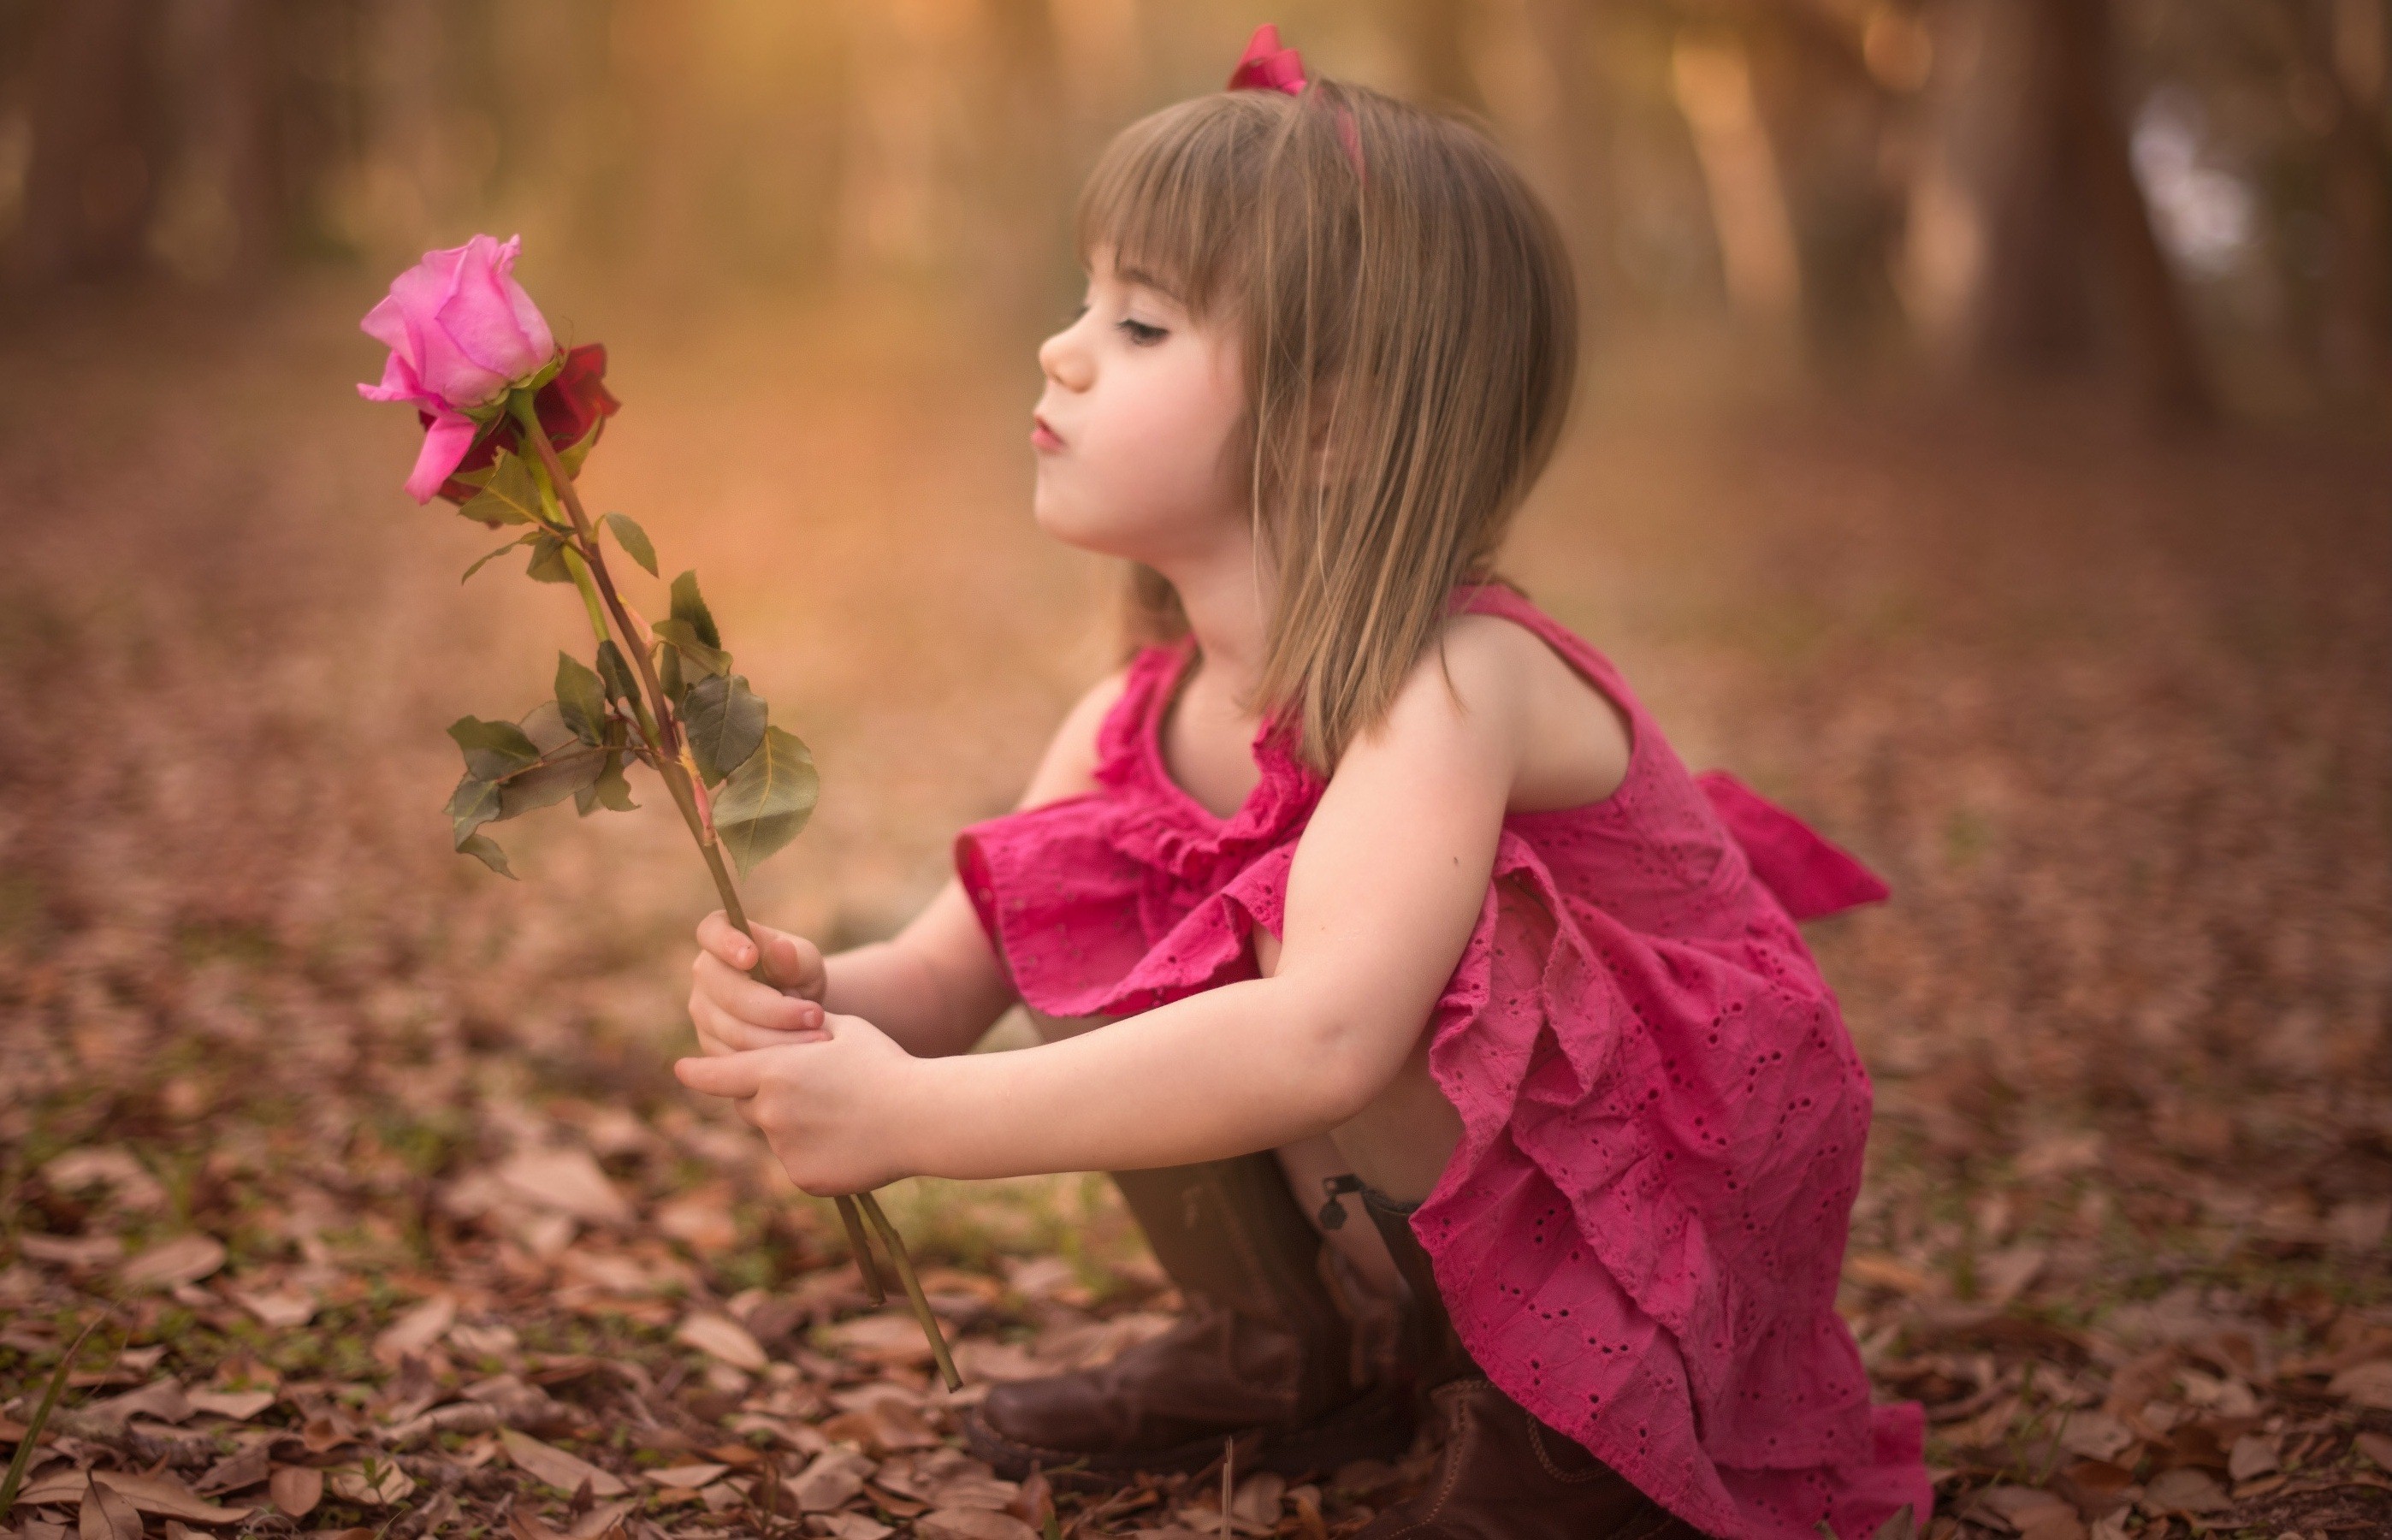 Wallpaper Beautiful Small Child Baby Wall With Lovely - Happy Rose Day Didi  - 2796x1800 Wallpaper 